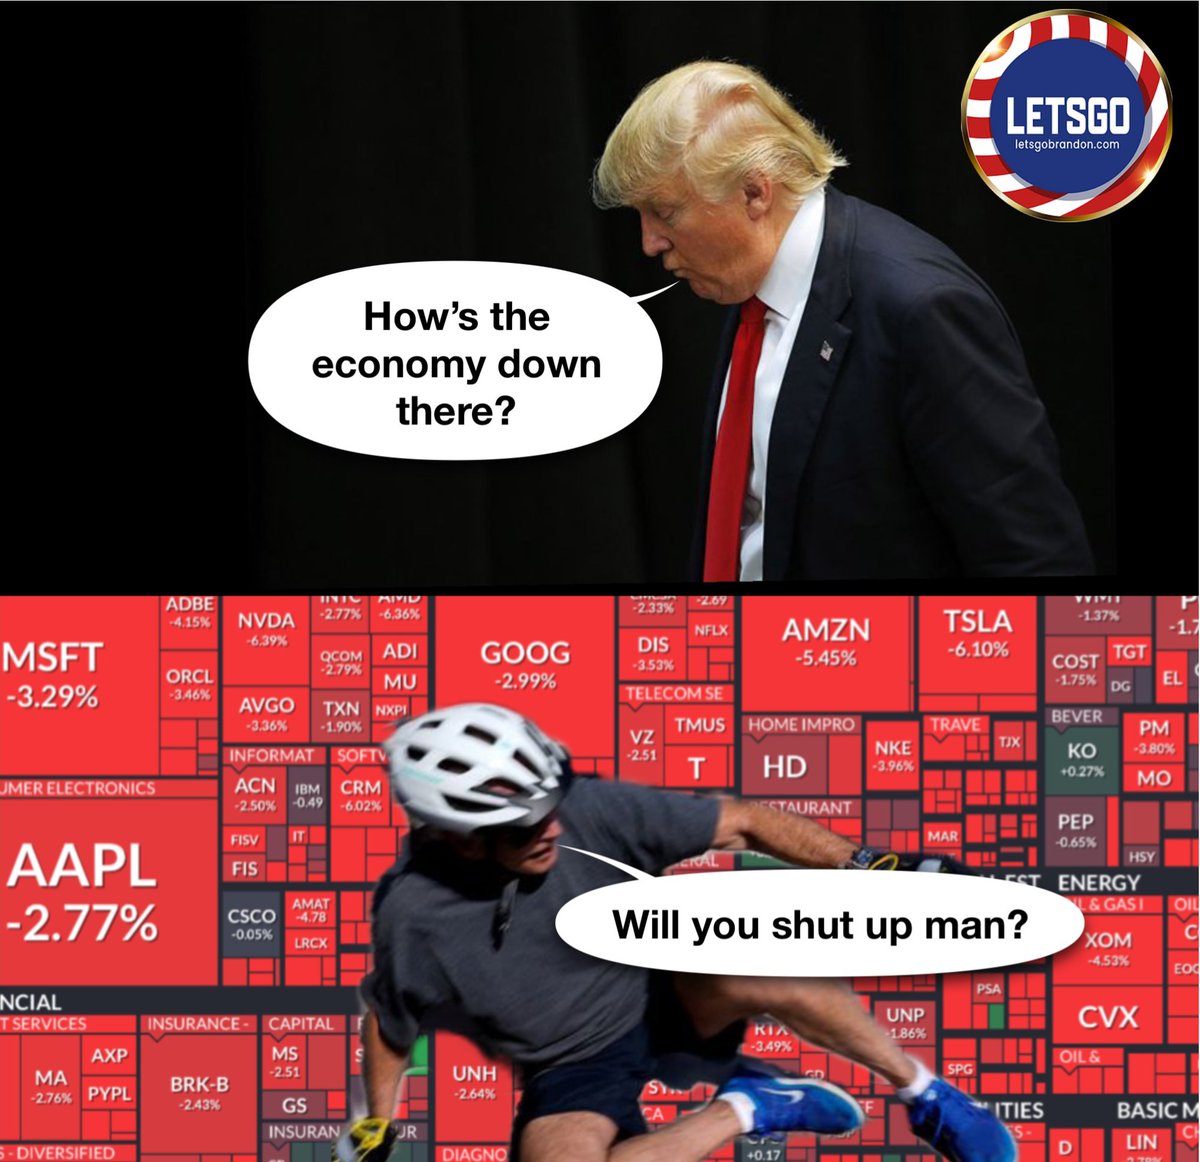 Biden and the economy falling hard. Build back better doesn’t seem to be working…